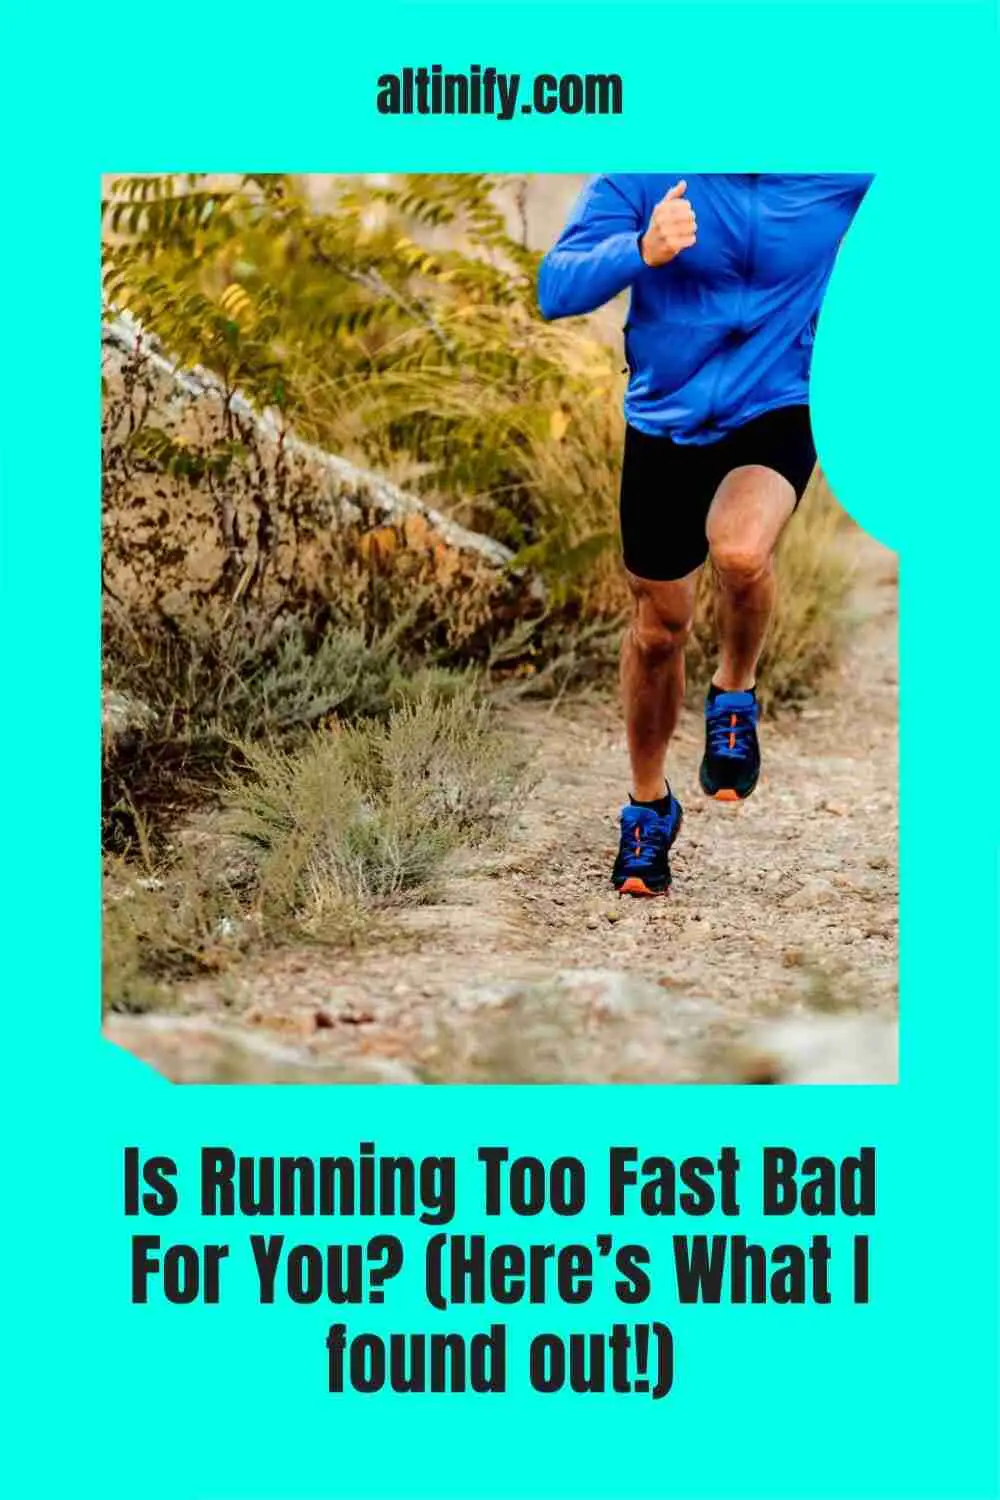 Is Running Too Fast Bad For You? (Here’s What I found out!)